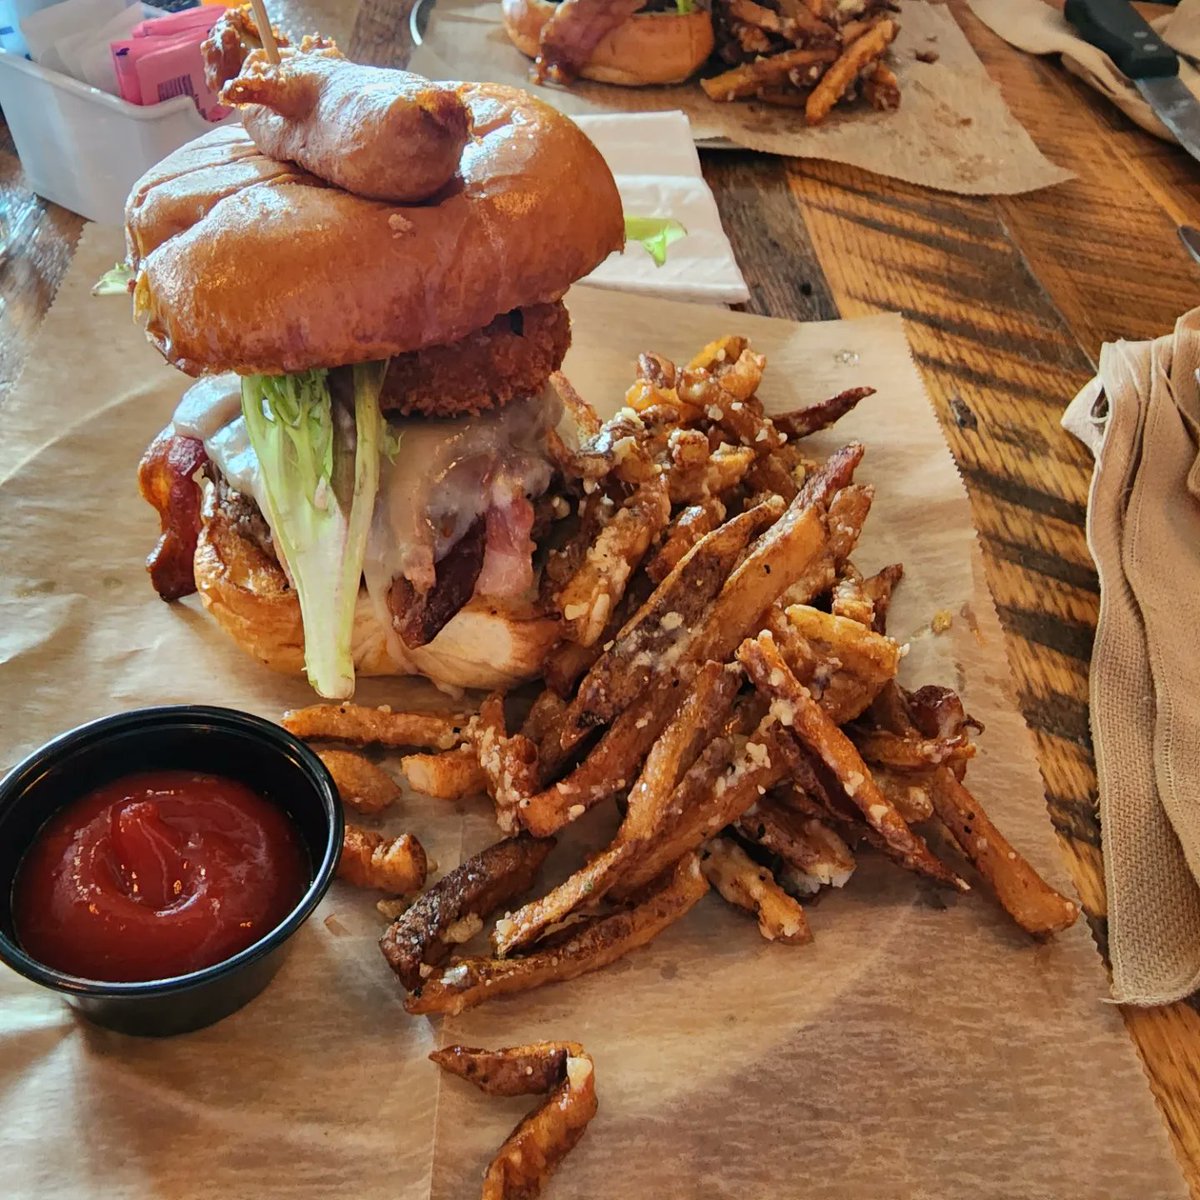 We stopped at Bacon, Bourbon, Beer (B3) in Washington PA
We started w/ Bacon Wrapped Cheese
Heather went with the W.C.B.
I went with the B3 burger.
#baconbourbonbeer #b3 #baconwrapped #bugers #hamburgers #baconwrappedmozzarella #washingtonpa #pa #pennsylvania